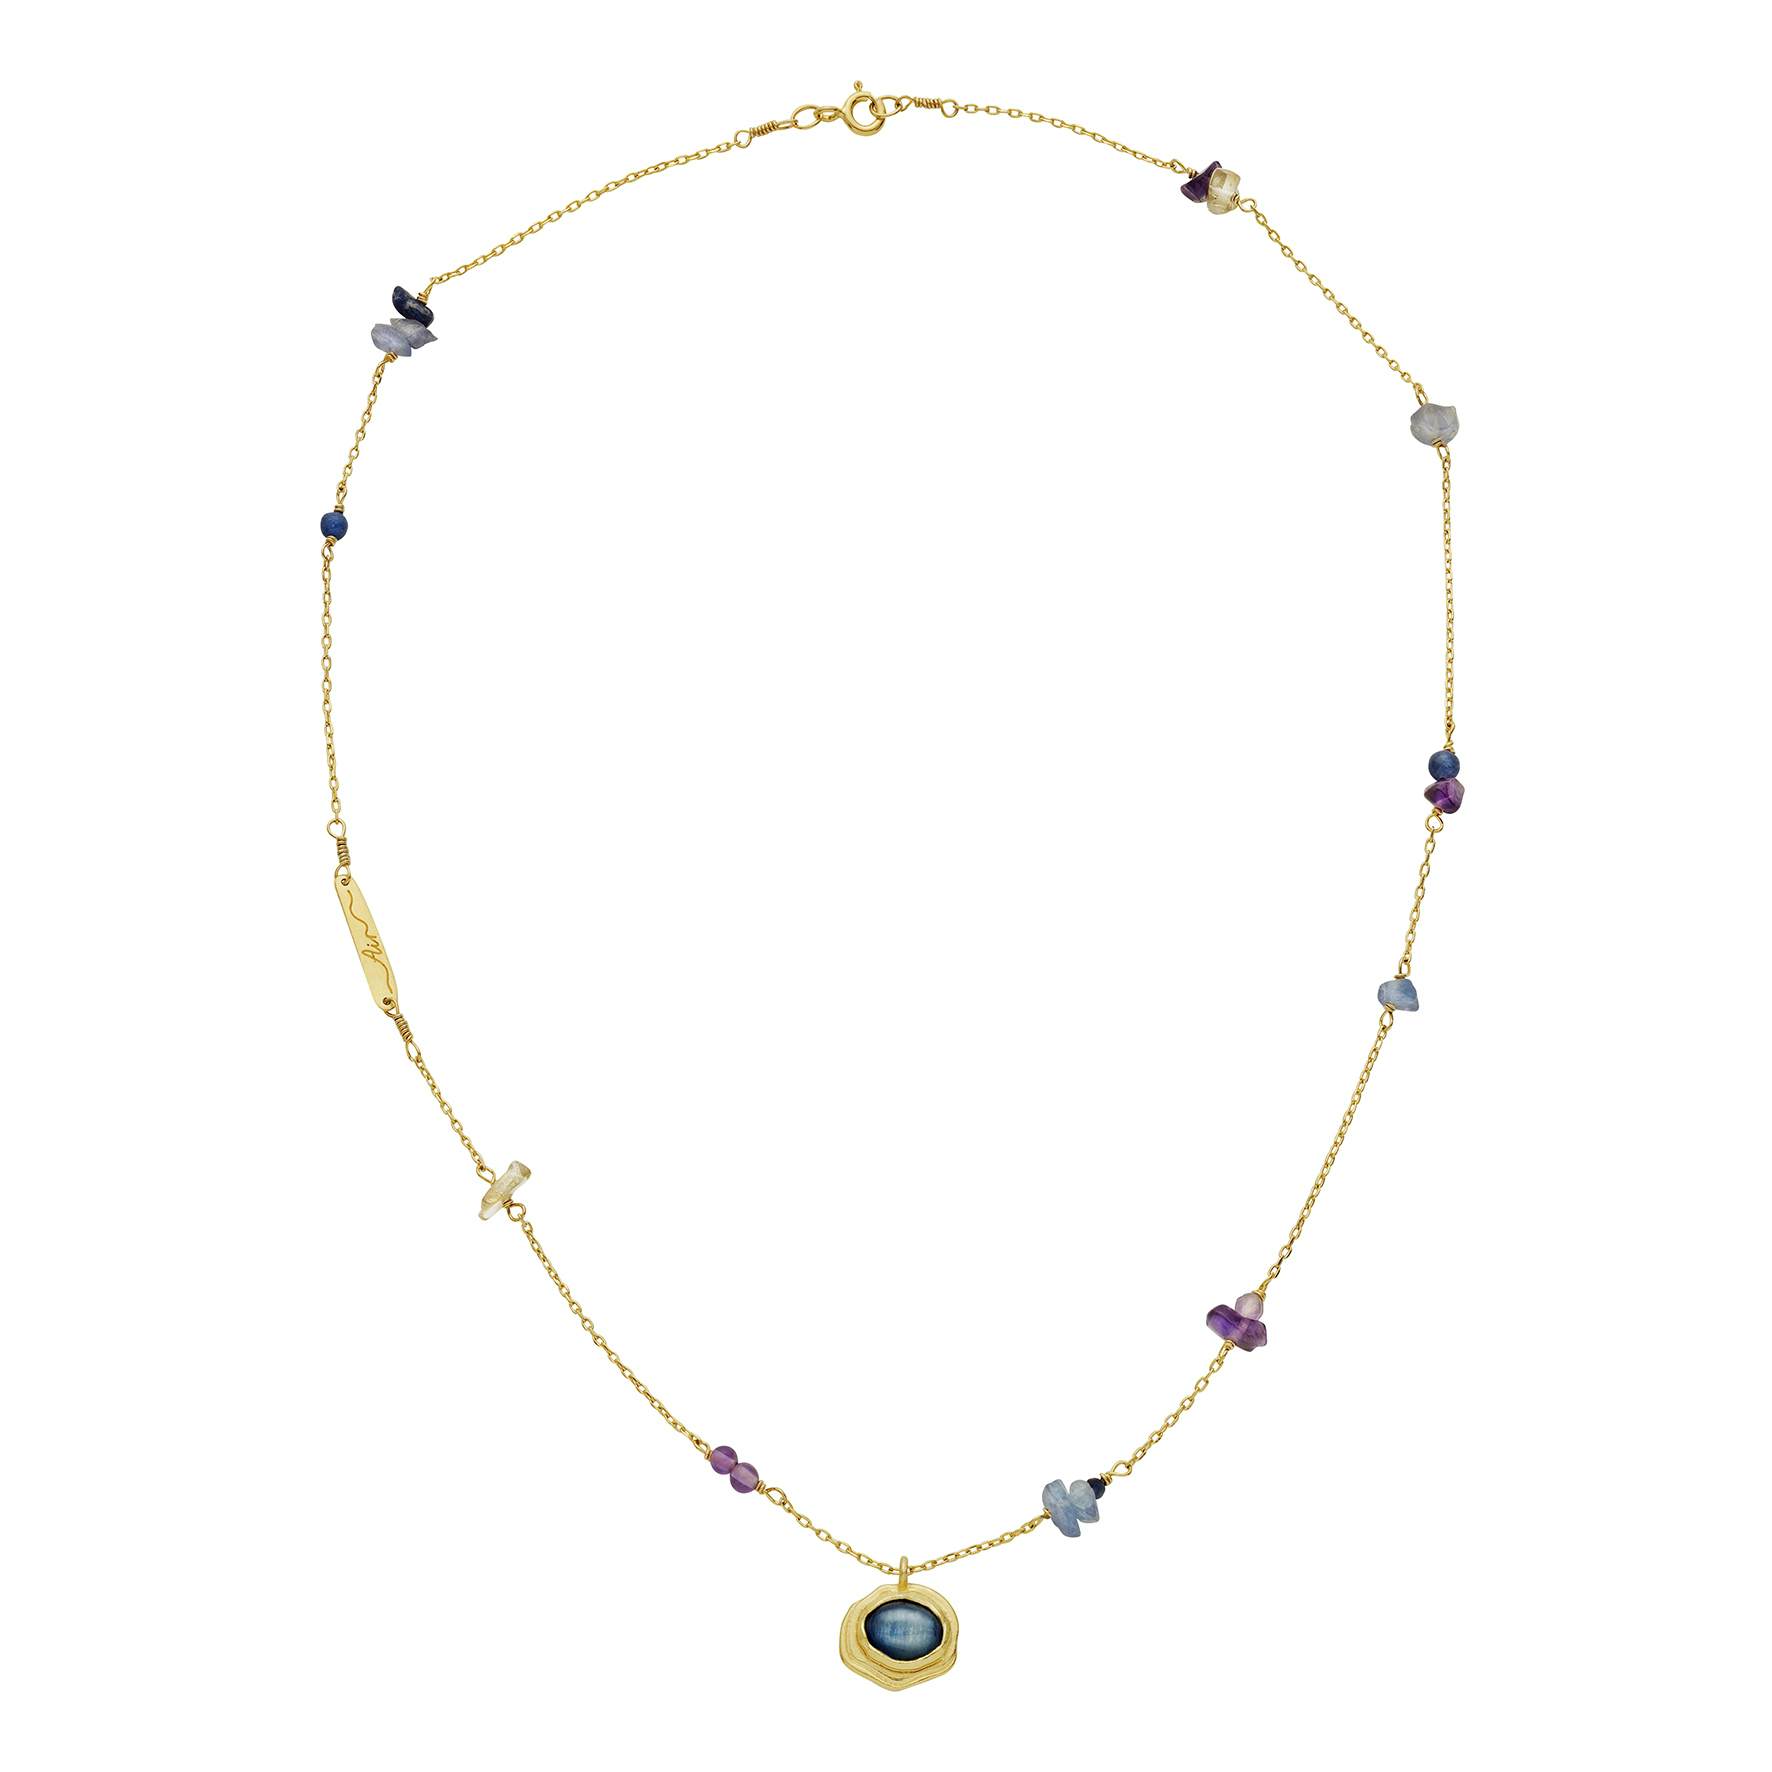 Aella Air Necklace from Maanesten in Goldplated-Silver Sterling 925